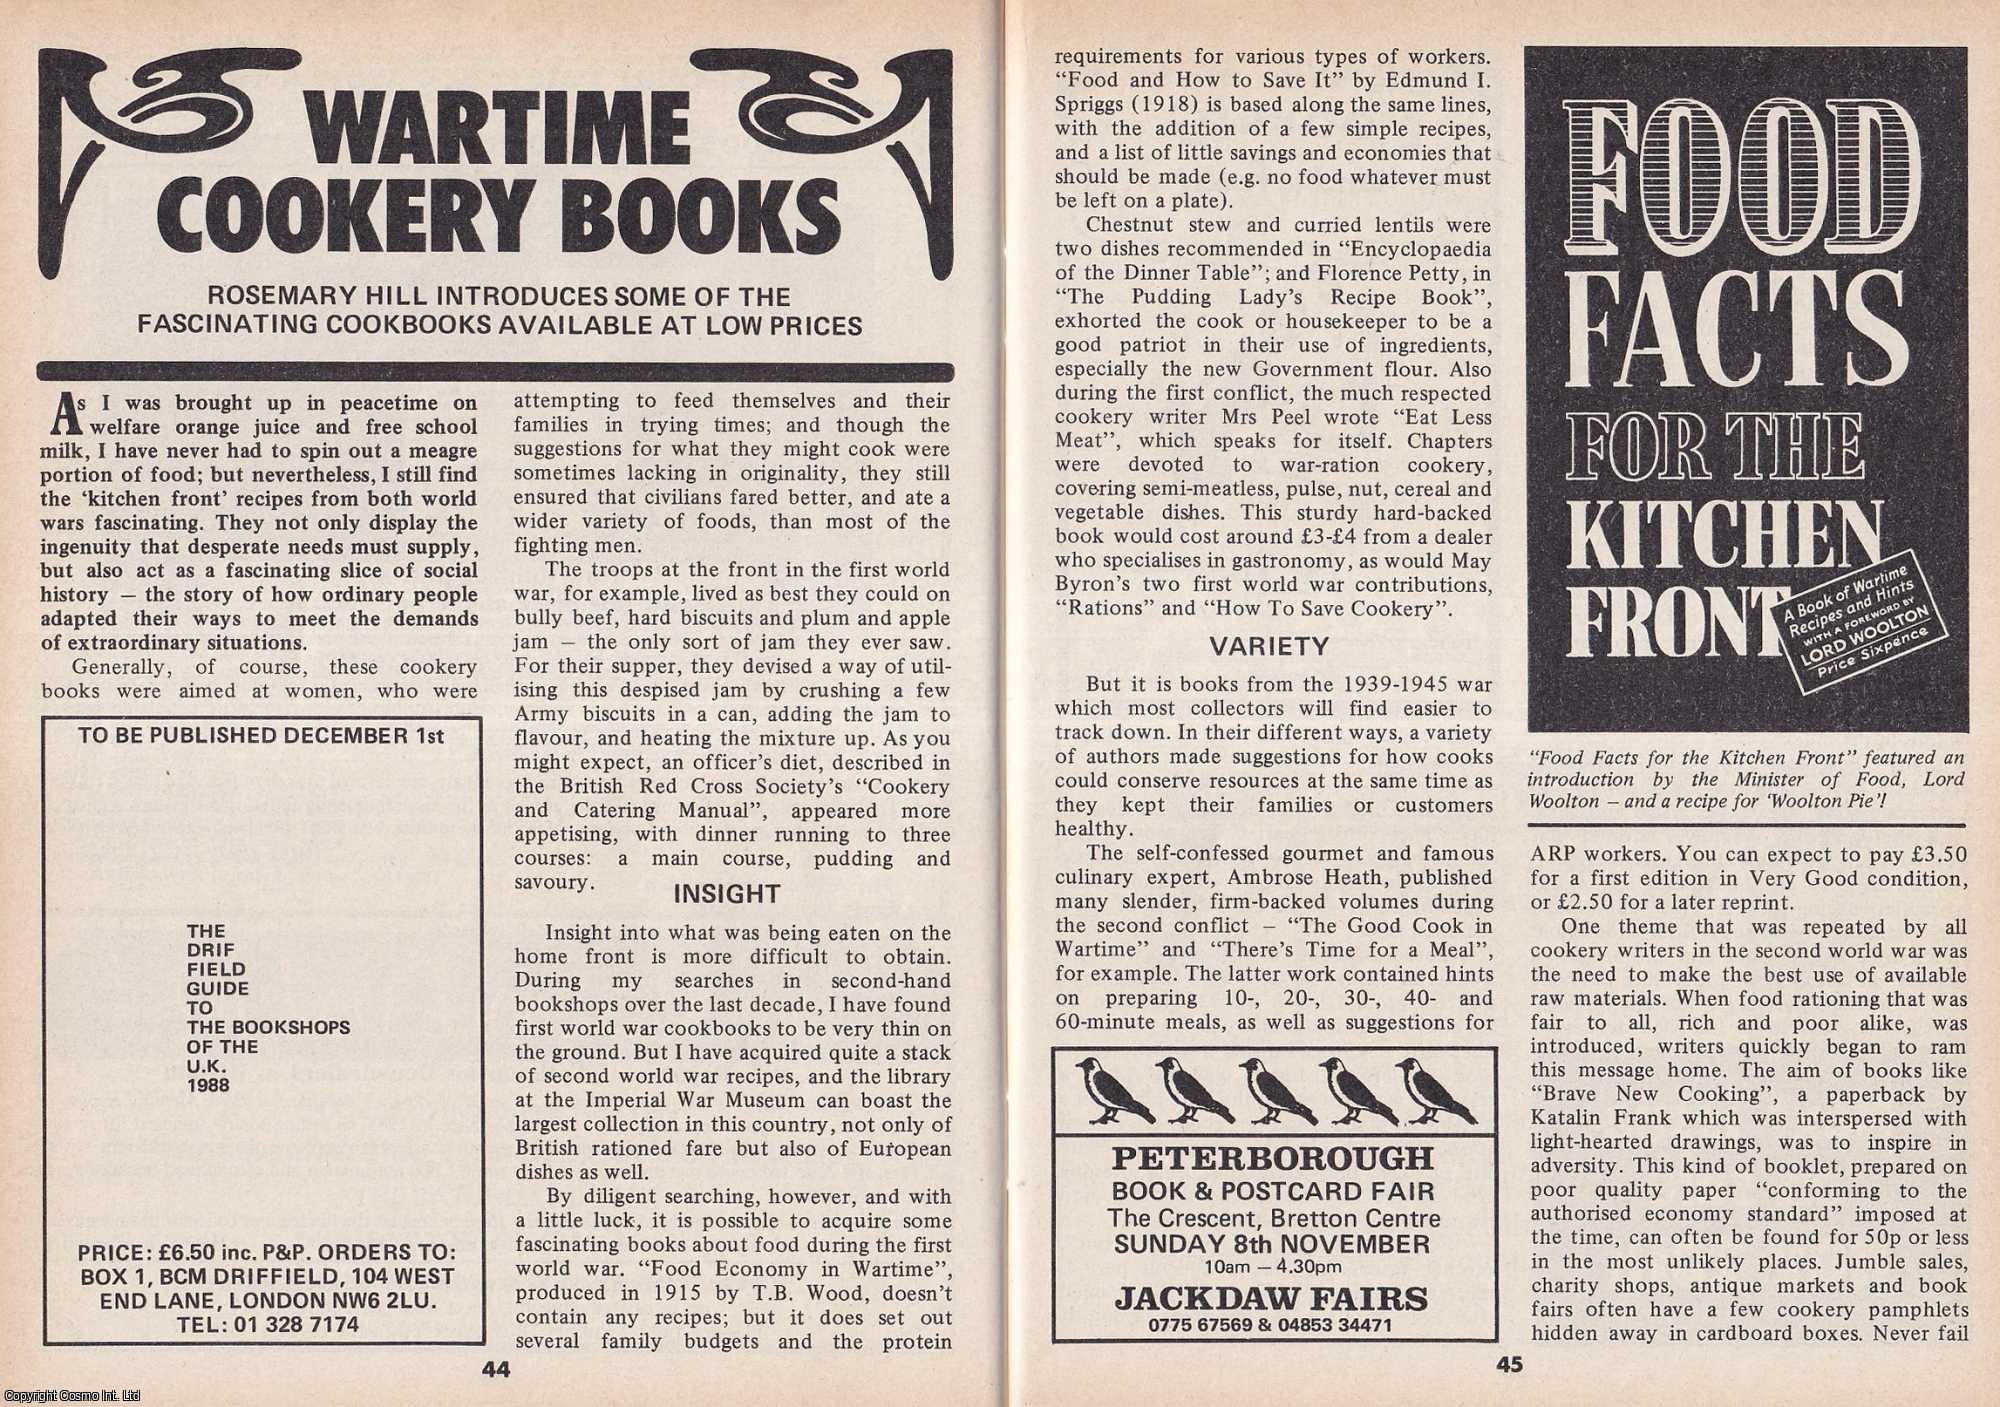 Rosemary Hill - Wartime Cookery Books. This is an original article separated from an issue of The Book & Magazine Collector publication.